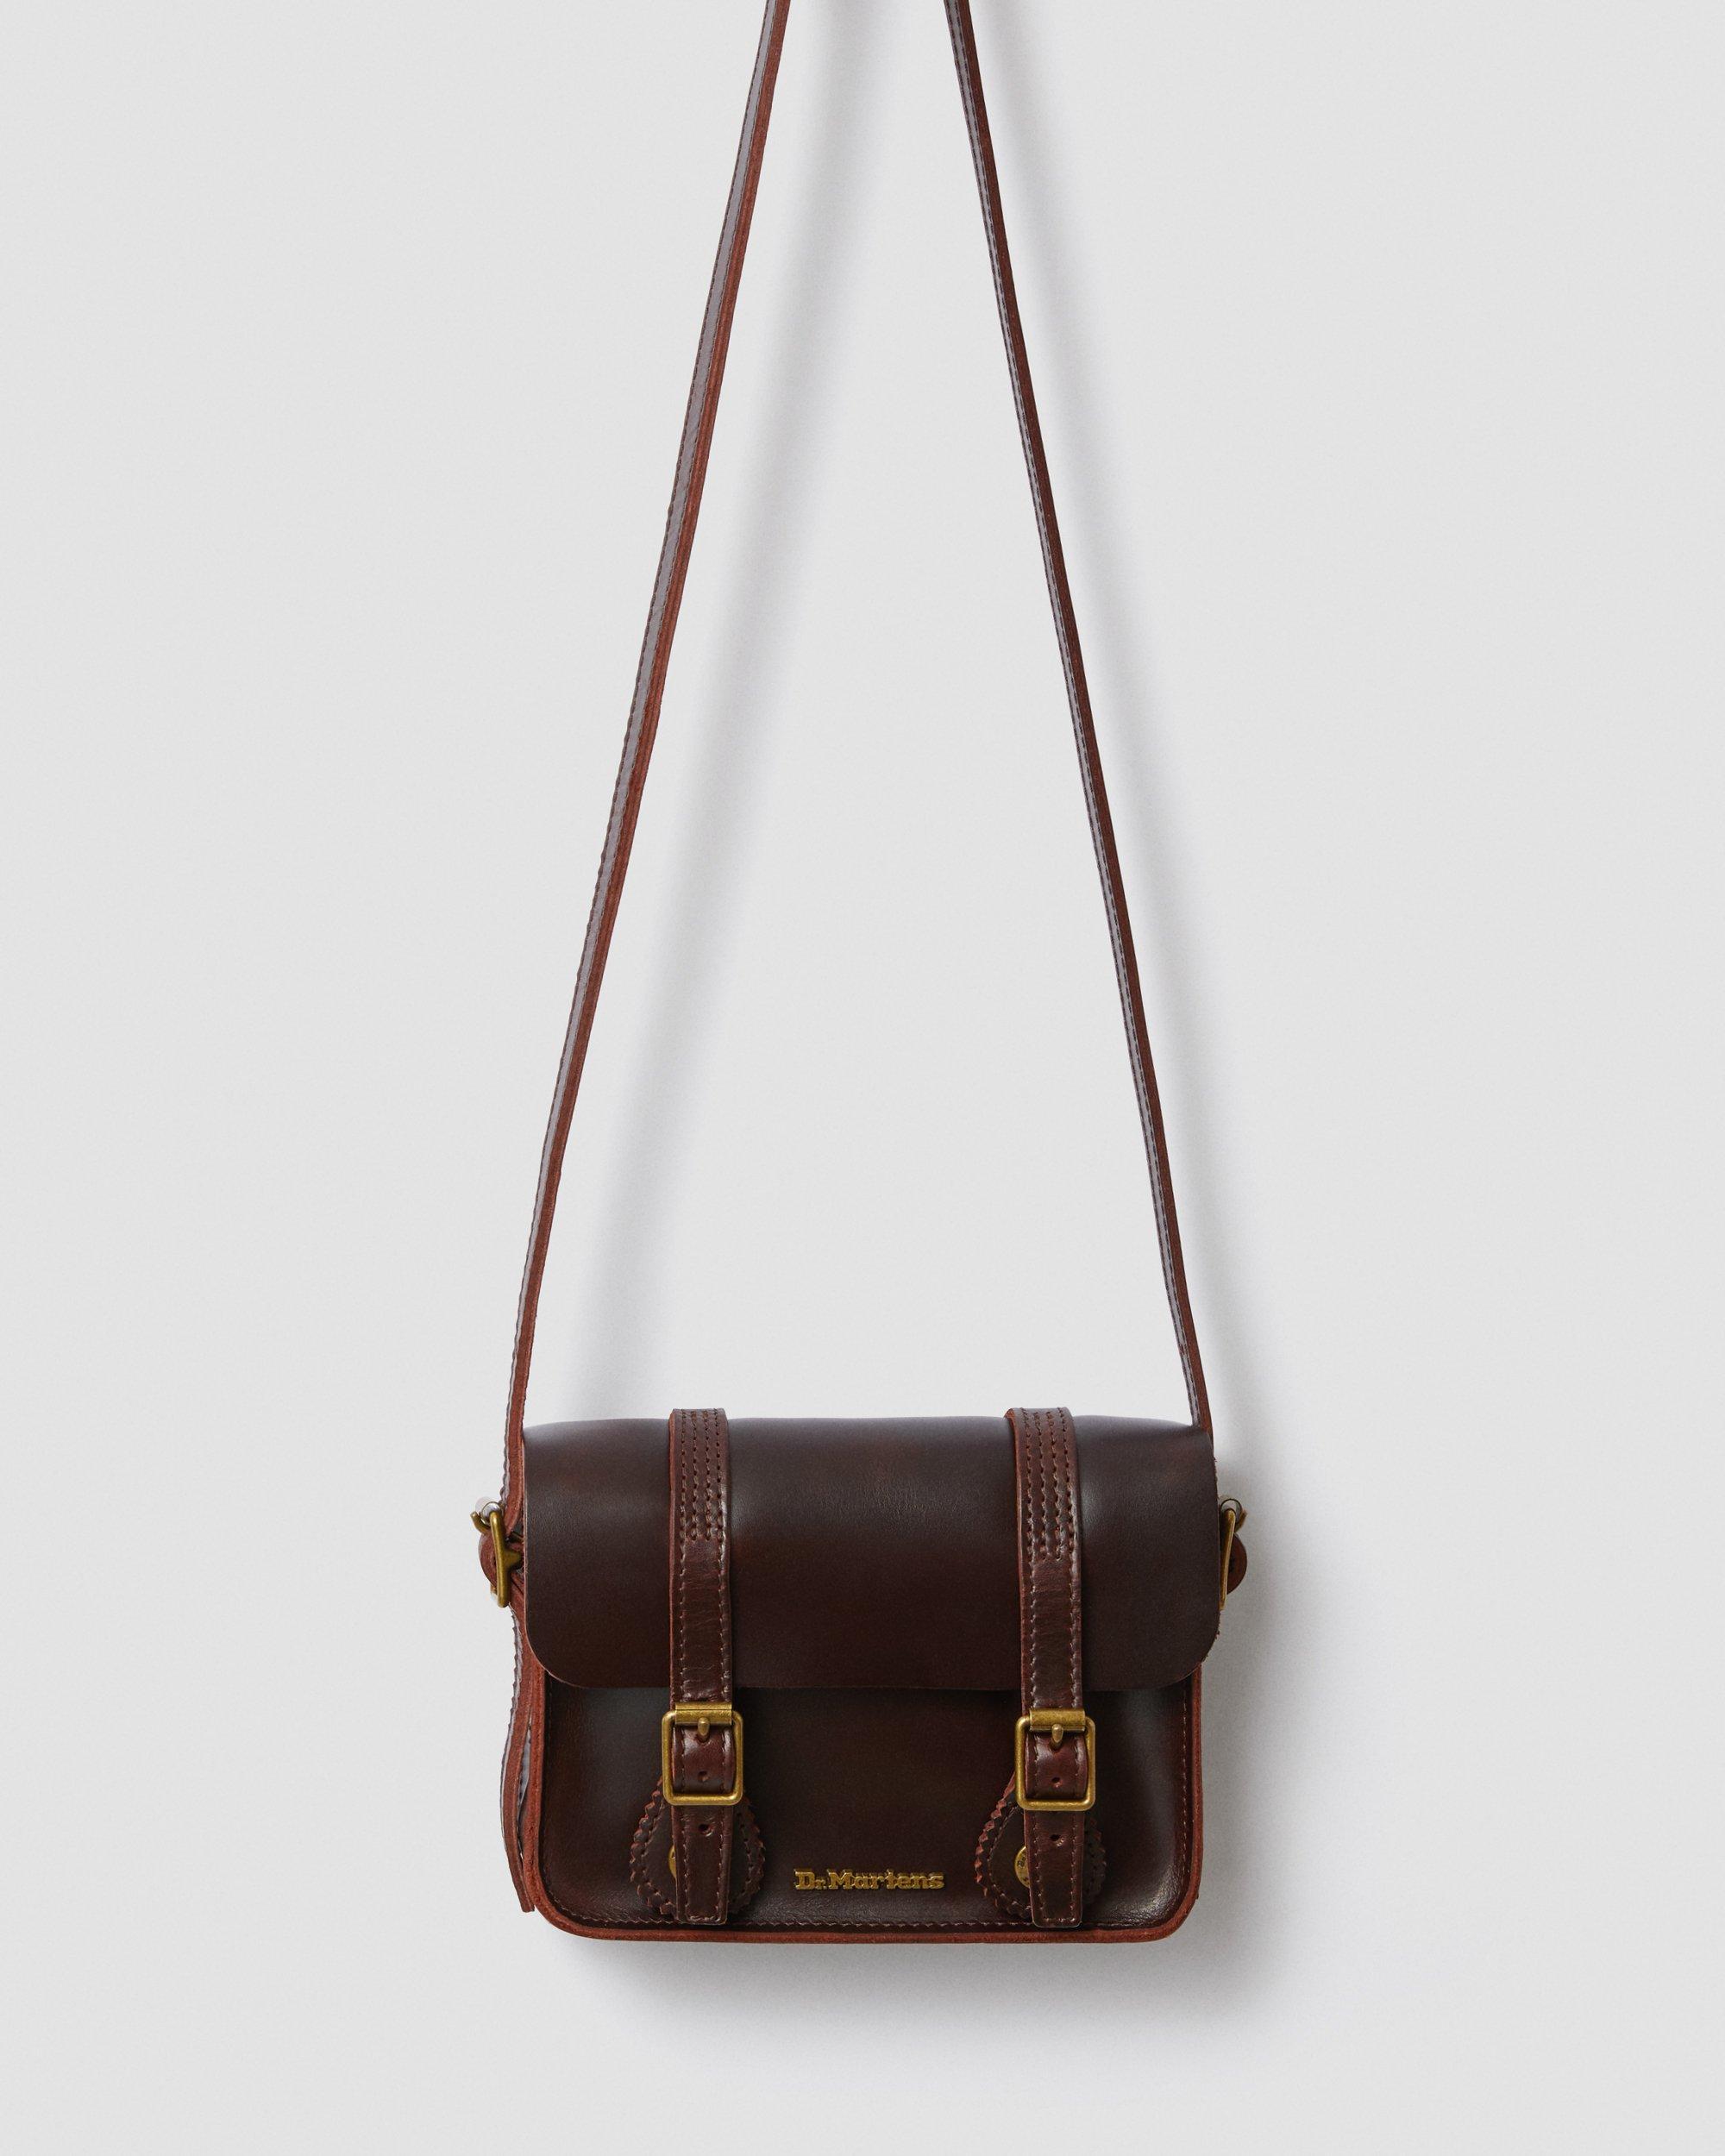 Dr. Martens 7 Inch Leather Crossbody Bag in | Lyst